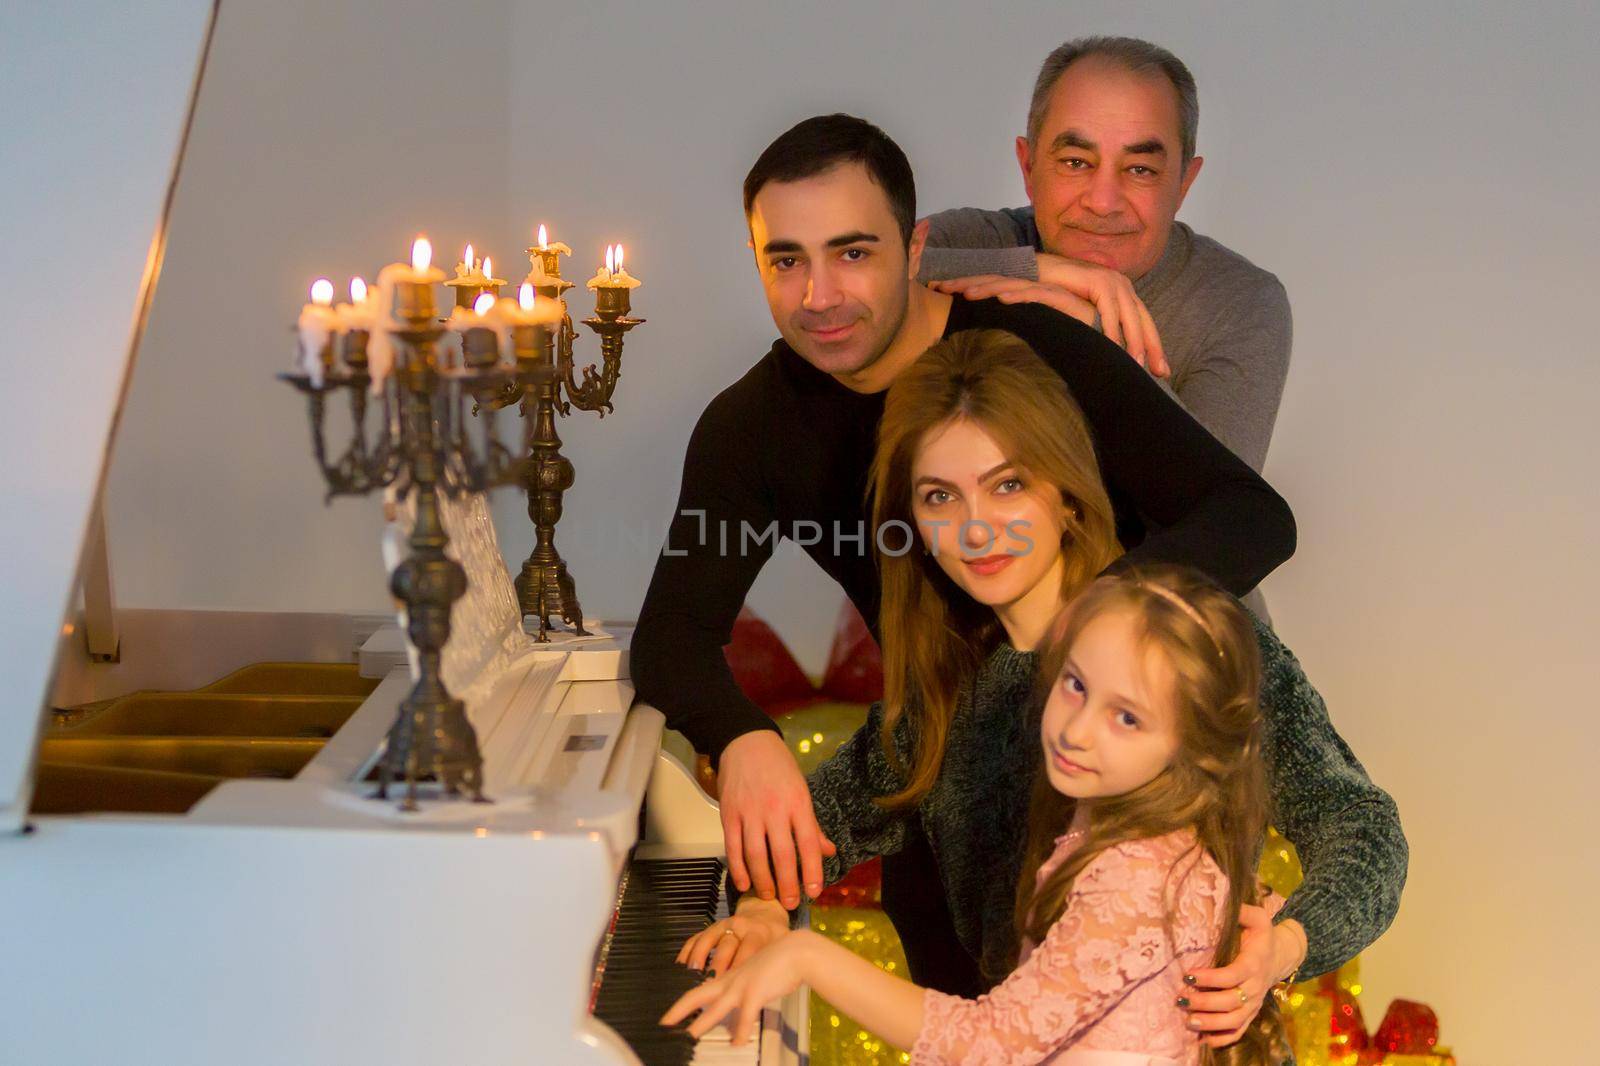 Portrait of Three Generation Family, Parents, Their Adorable Daughter and Grandfather Posing near Grand Piano Decorated with Burning Candles in Candlesticks, Family Members Hugging, Looking at Camera